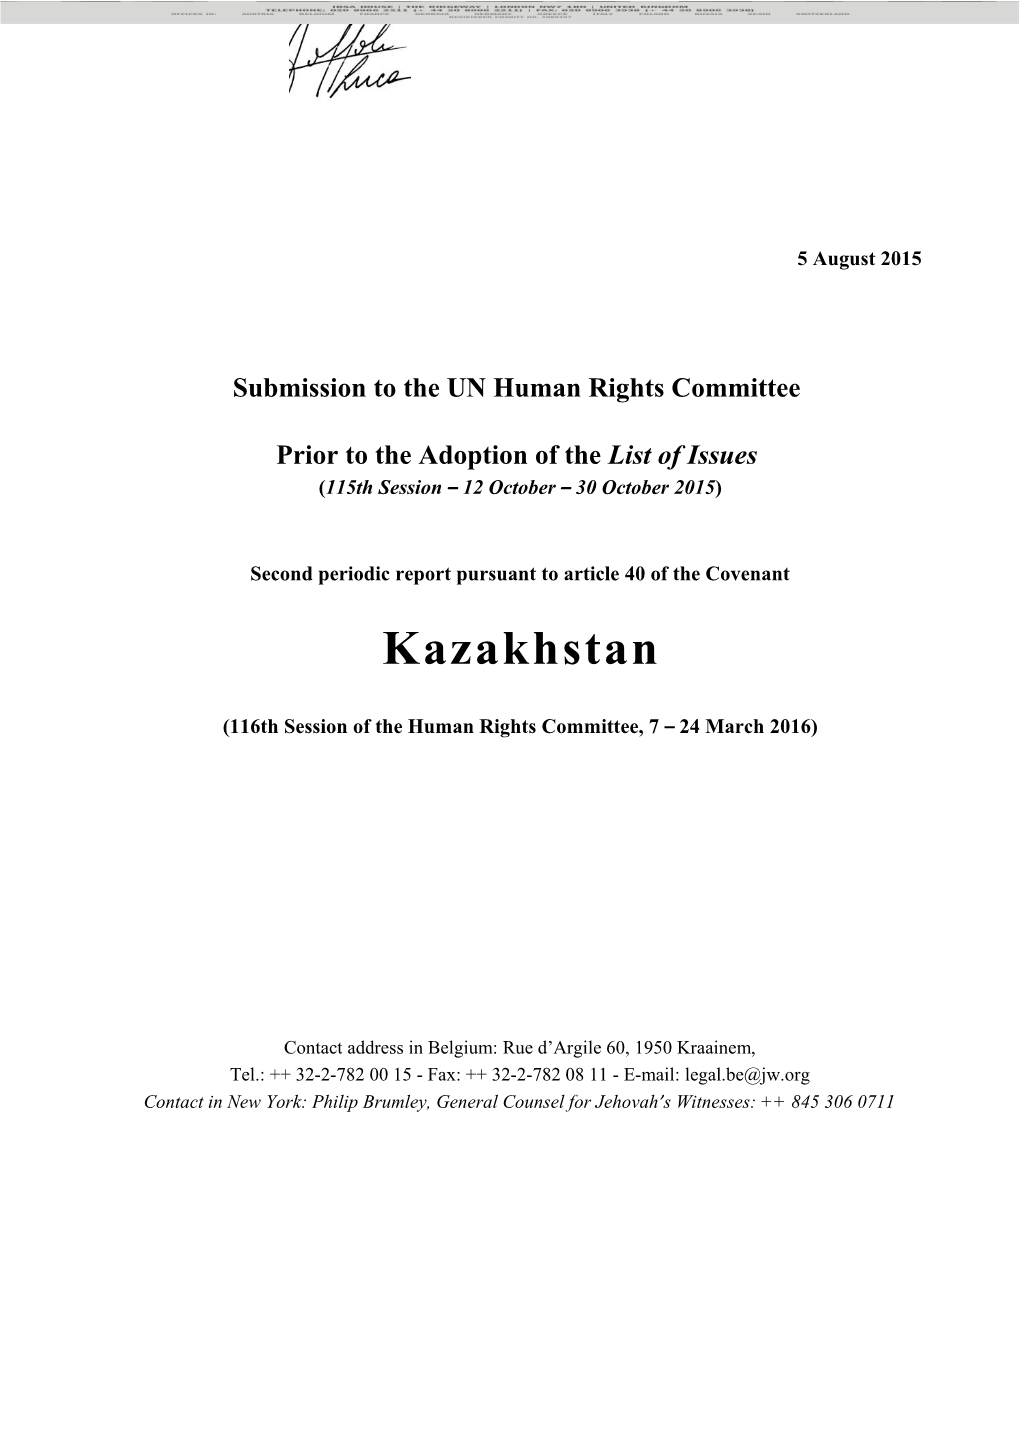 Submission to the UN Human Rights Committee